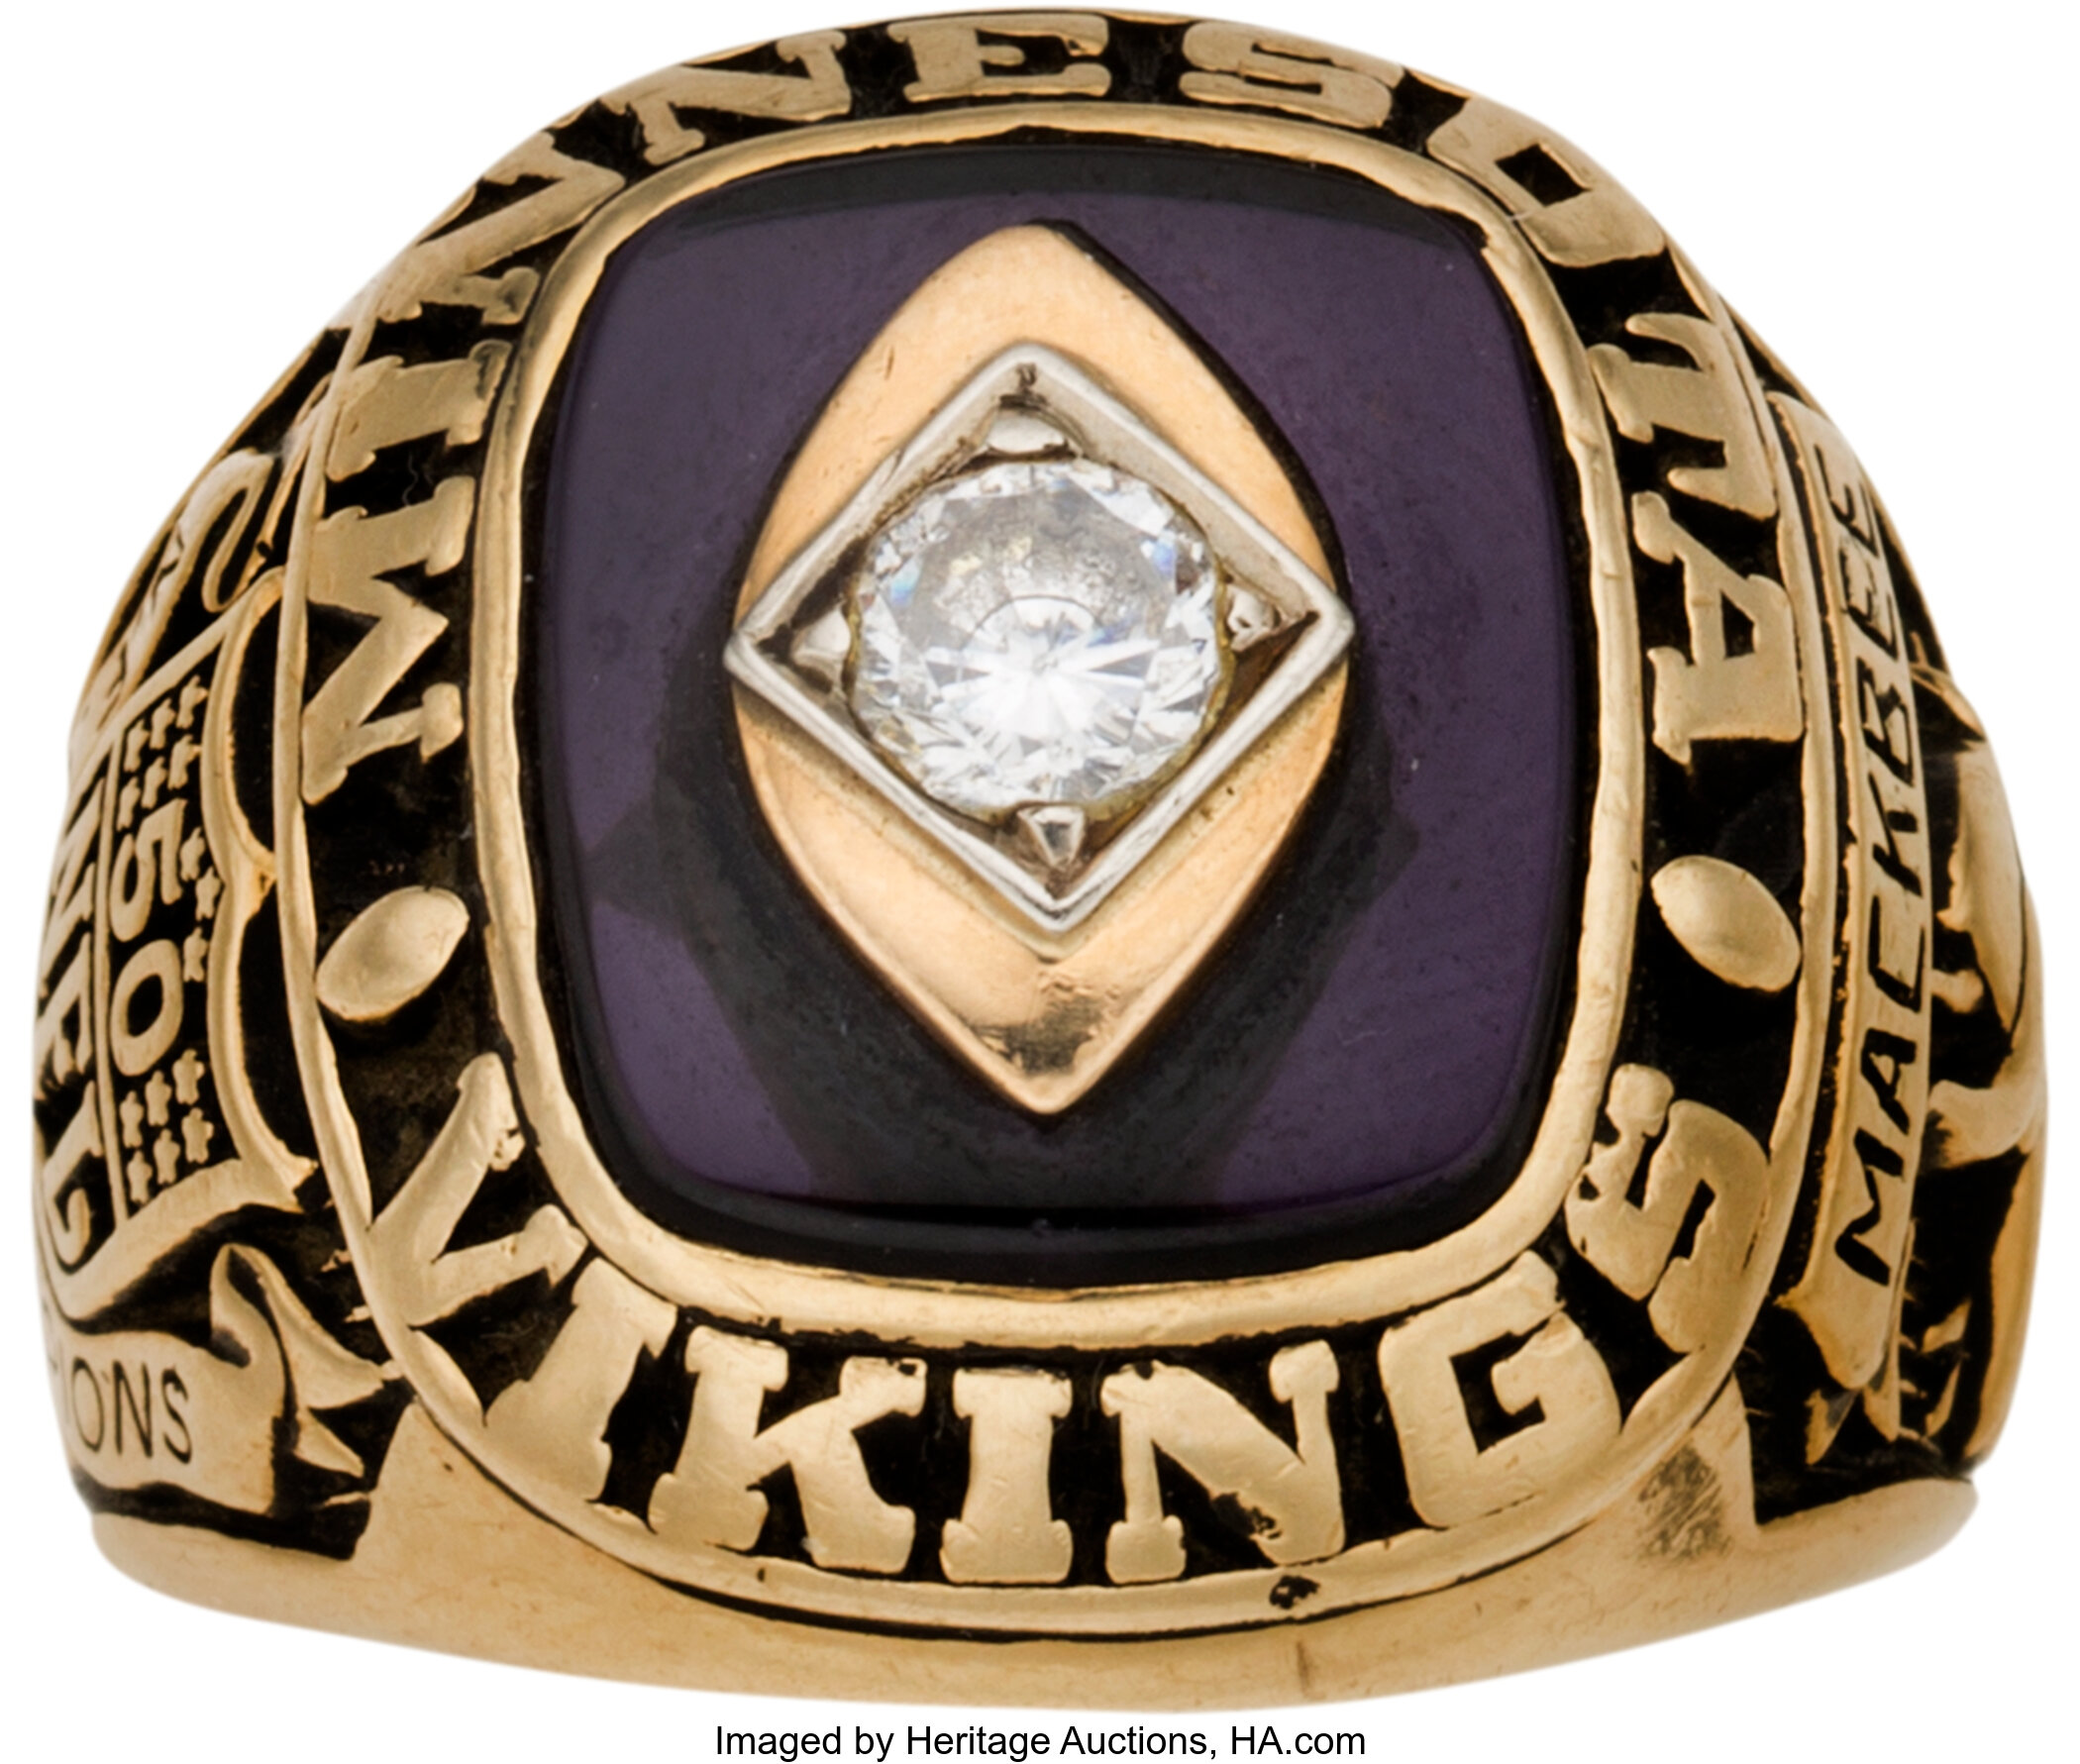 1969 Minnesota Vikings NFL Championship Ring Presented to Earsell, Lot  #81584